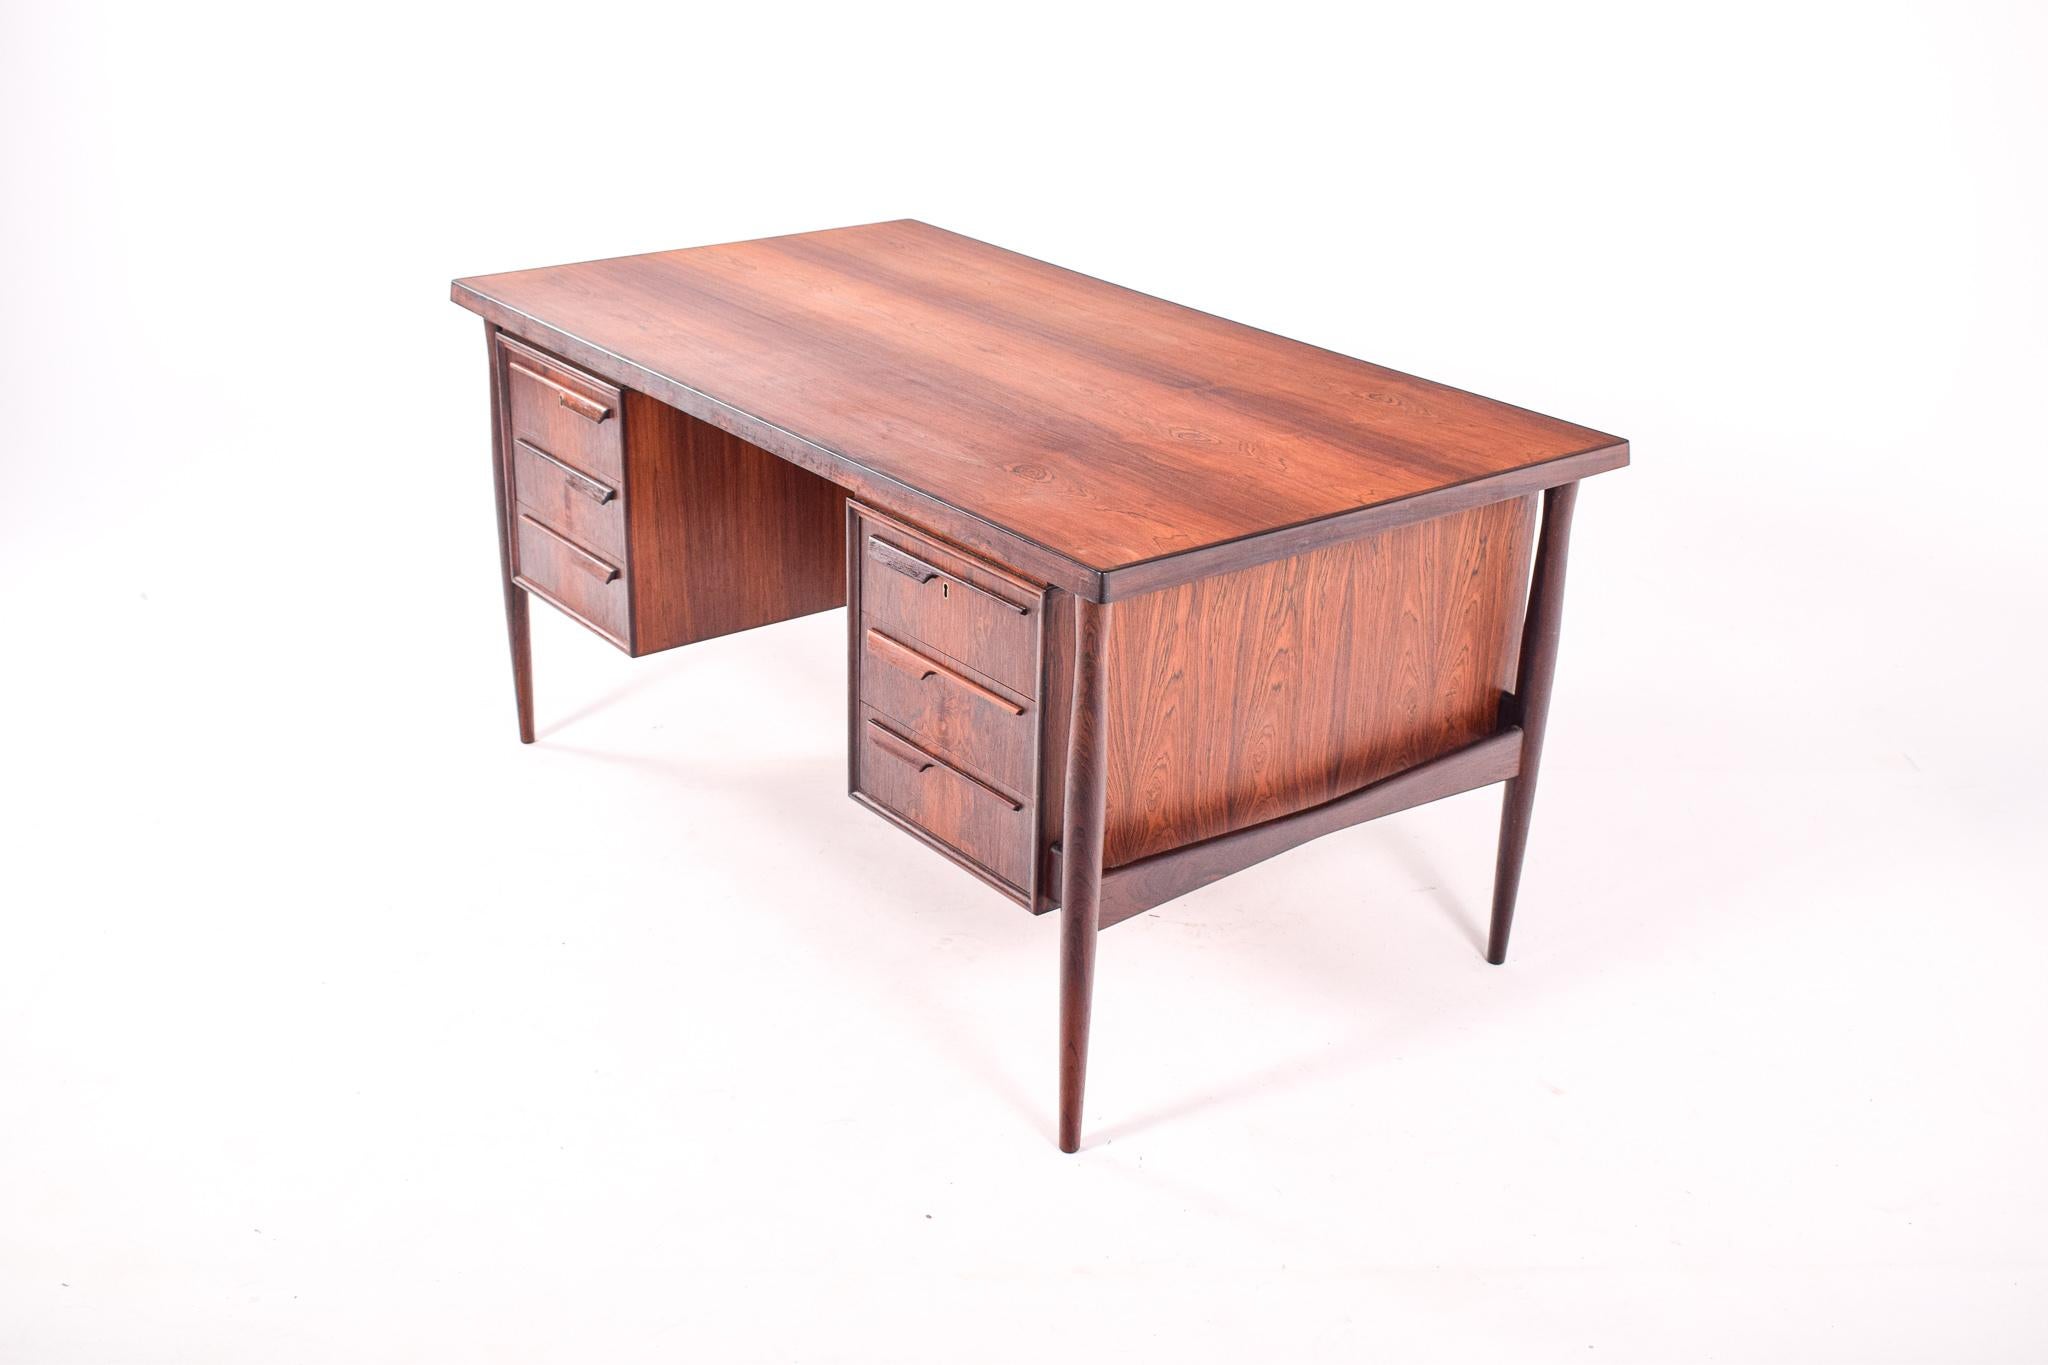 The beautifull rosewood color of this desk is exceptional. Striking rosewood grain throughout this piece. This desk designed by Arne Vodder for Sibast has three drawers either side and two cabinets at rear with solid rosewood pulls. Made during the